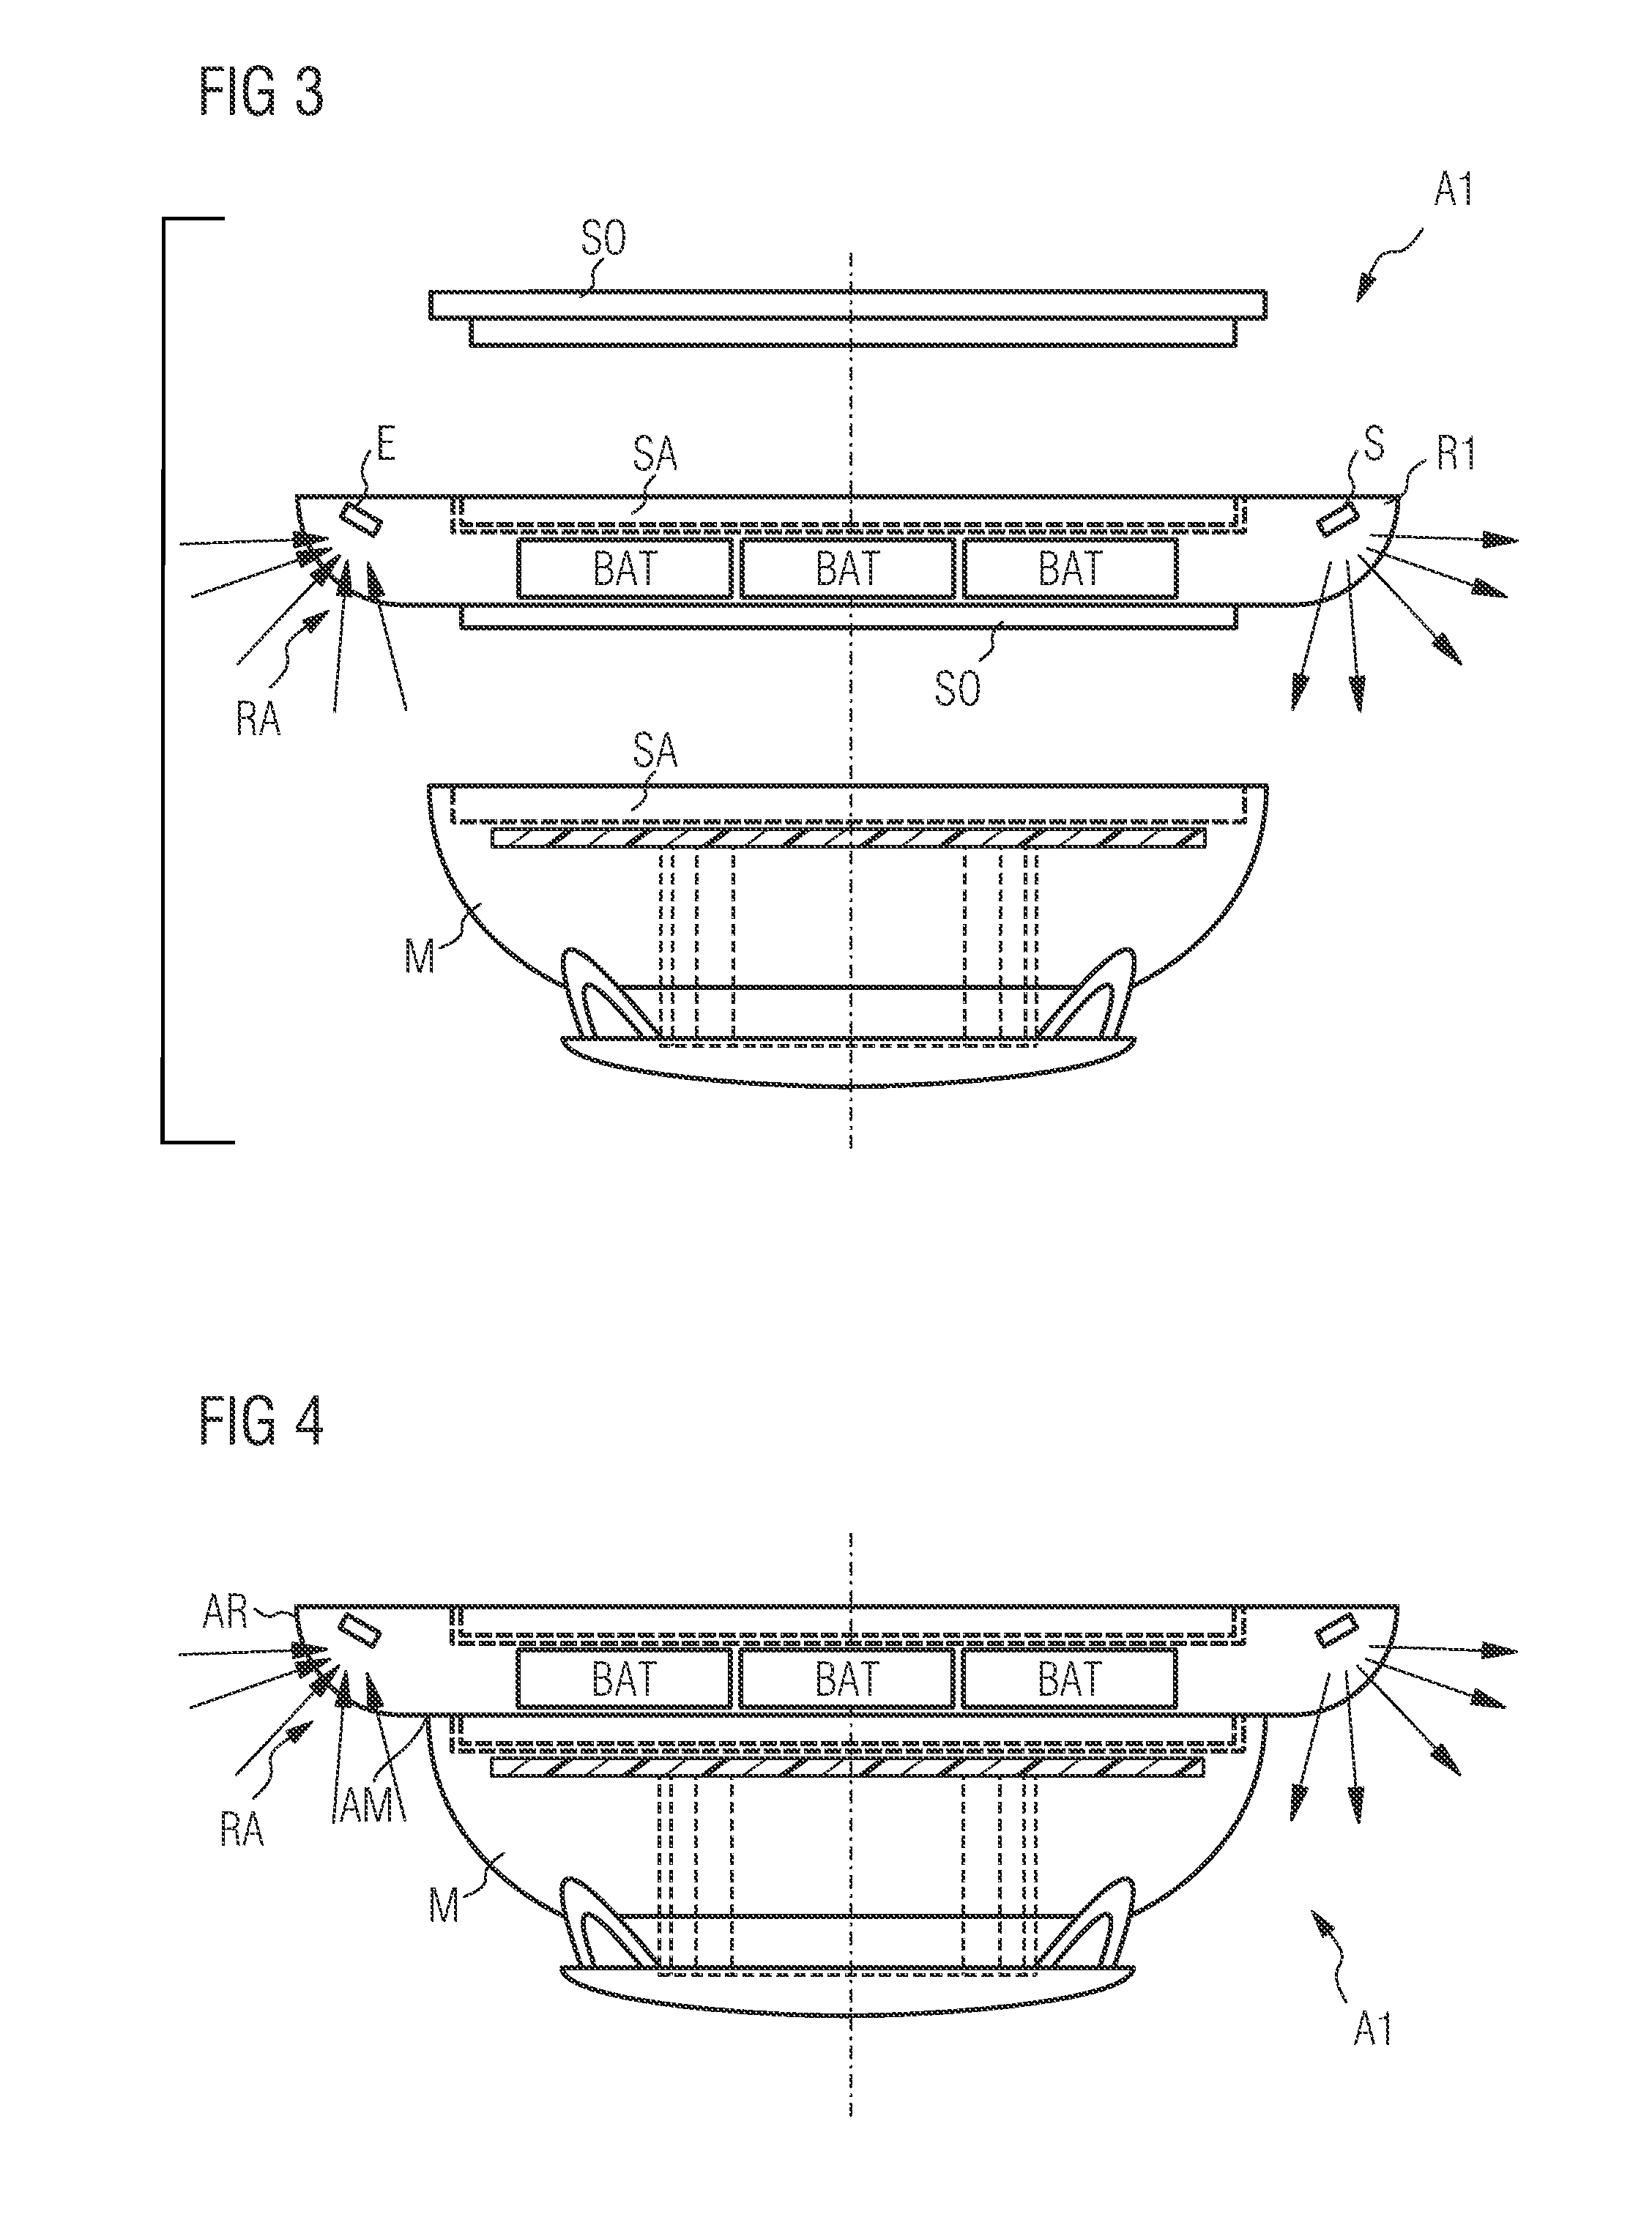 Auxiliary device for a hazard alarm constructed as a point type detector for function monitoring of the hazard alarm, and an arrangement and method of monitoring using a device of this kind